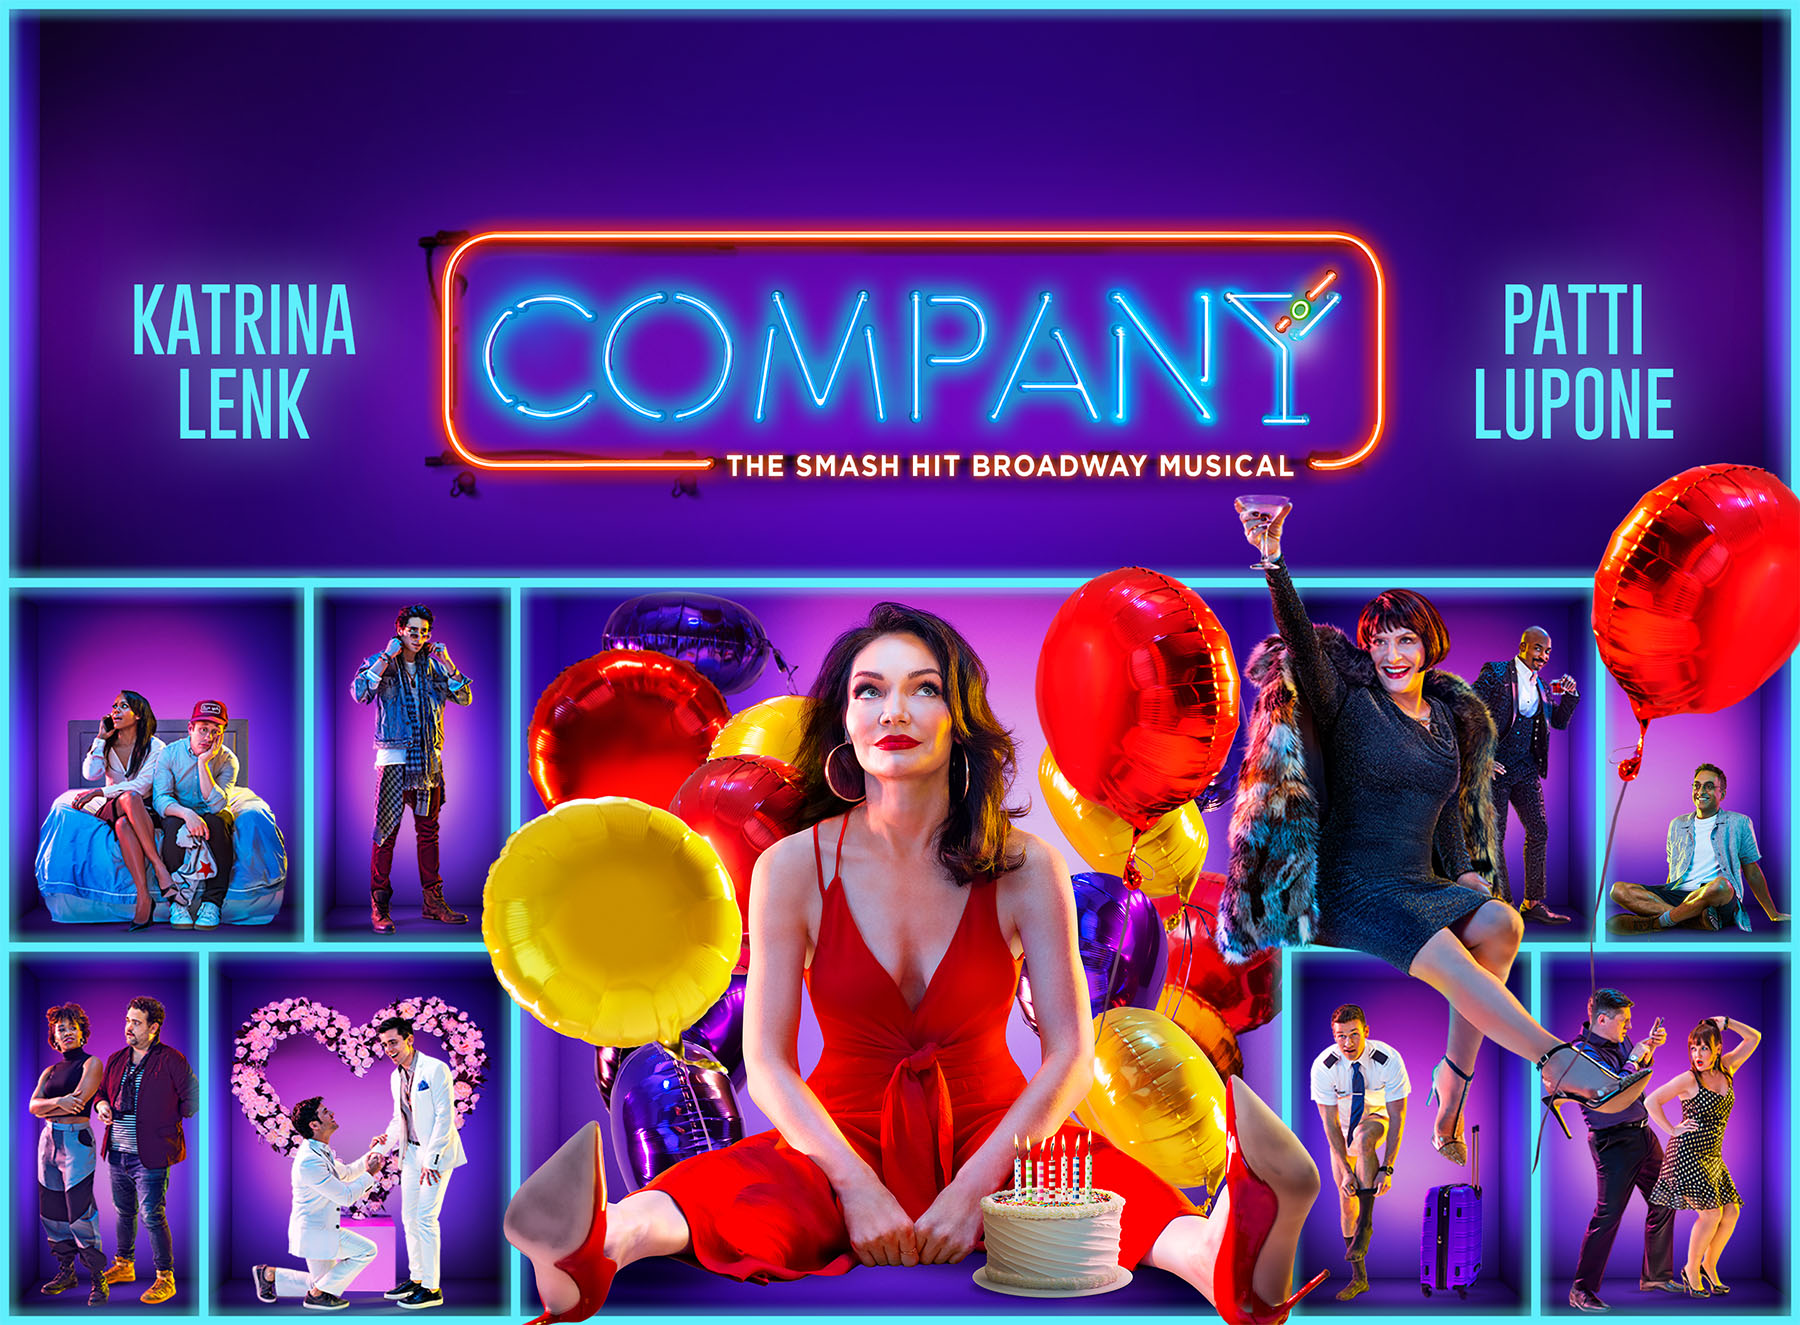 The cast of Broadway's COMPANY, nominated for Tony Award for Best Revival of a Musical at the 75th Annual Tony Awards